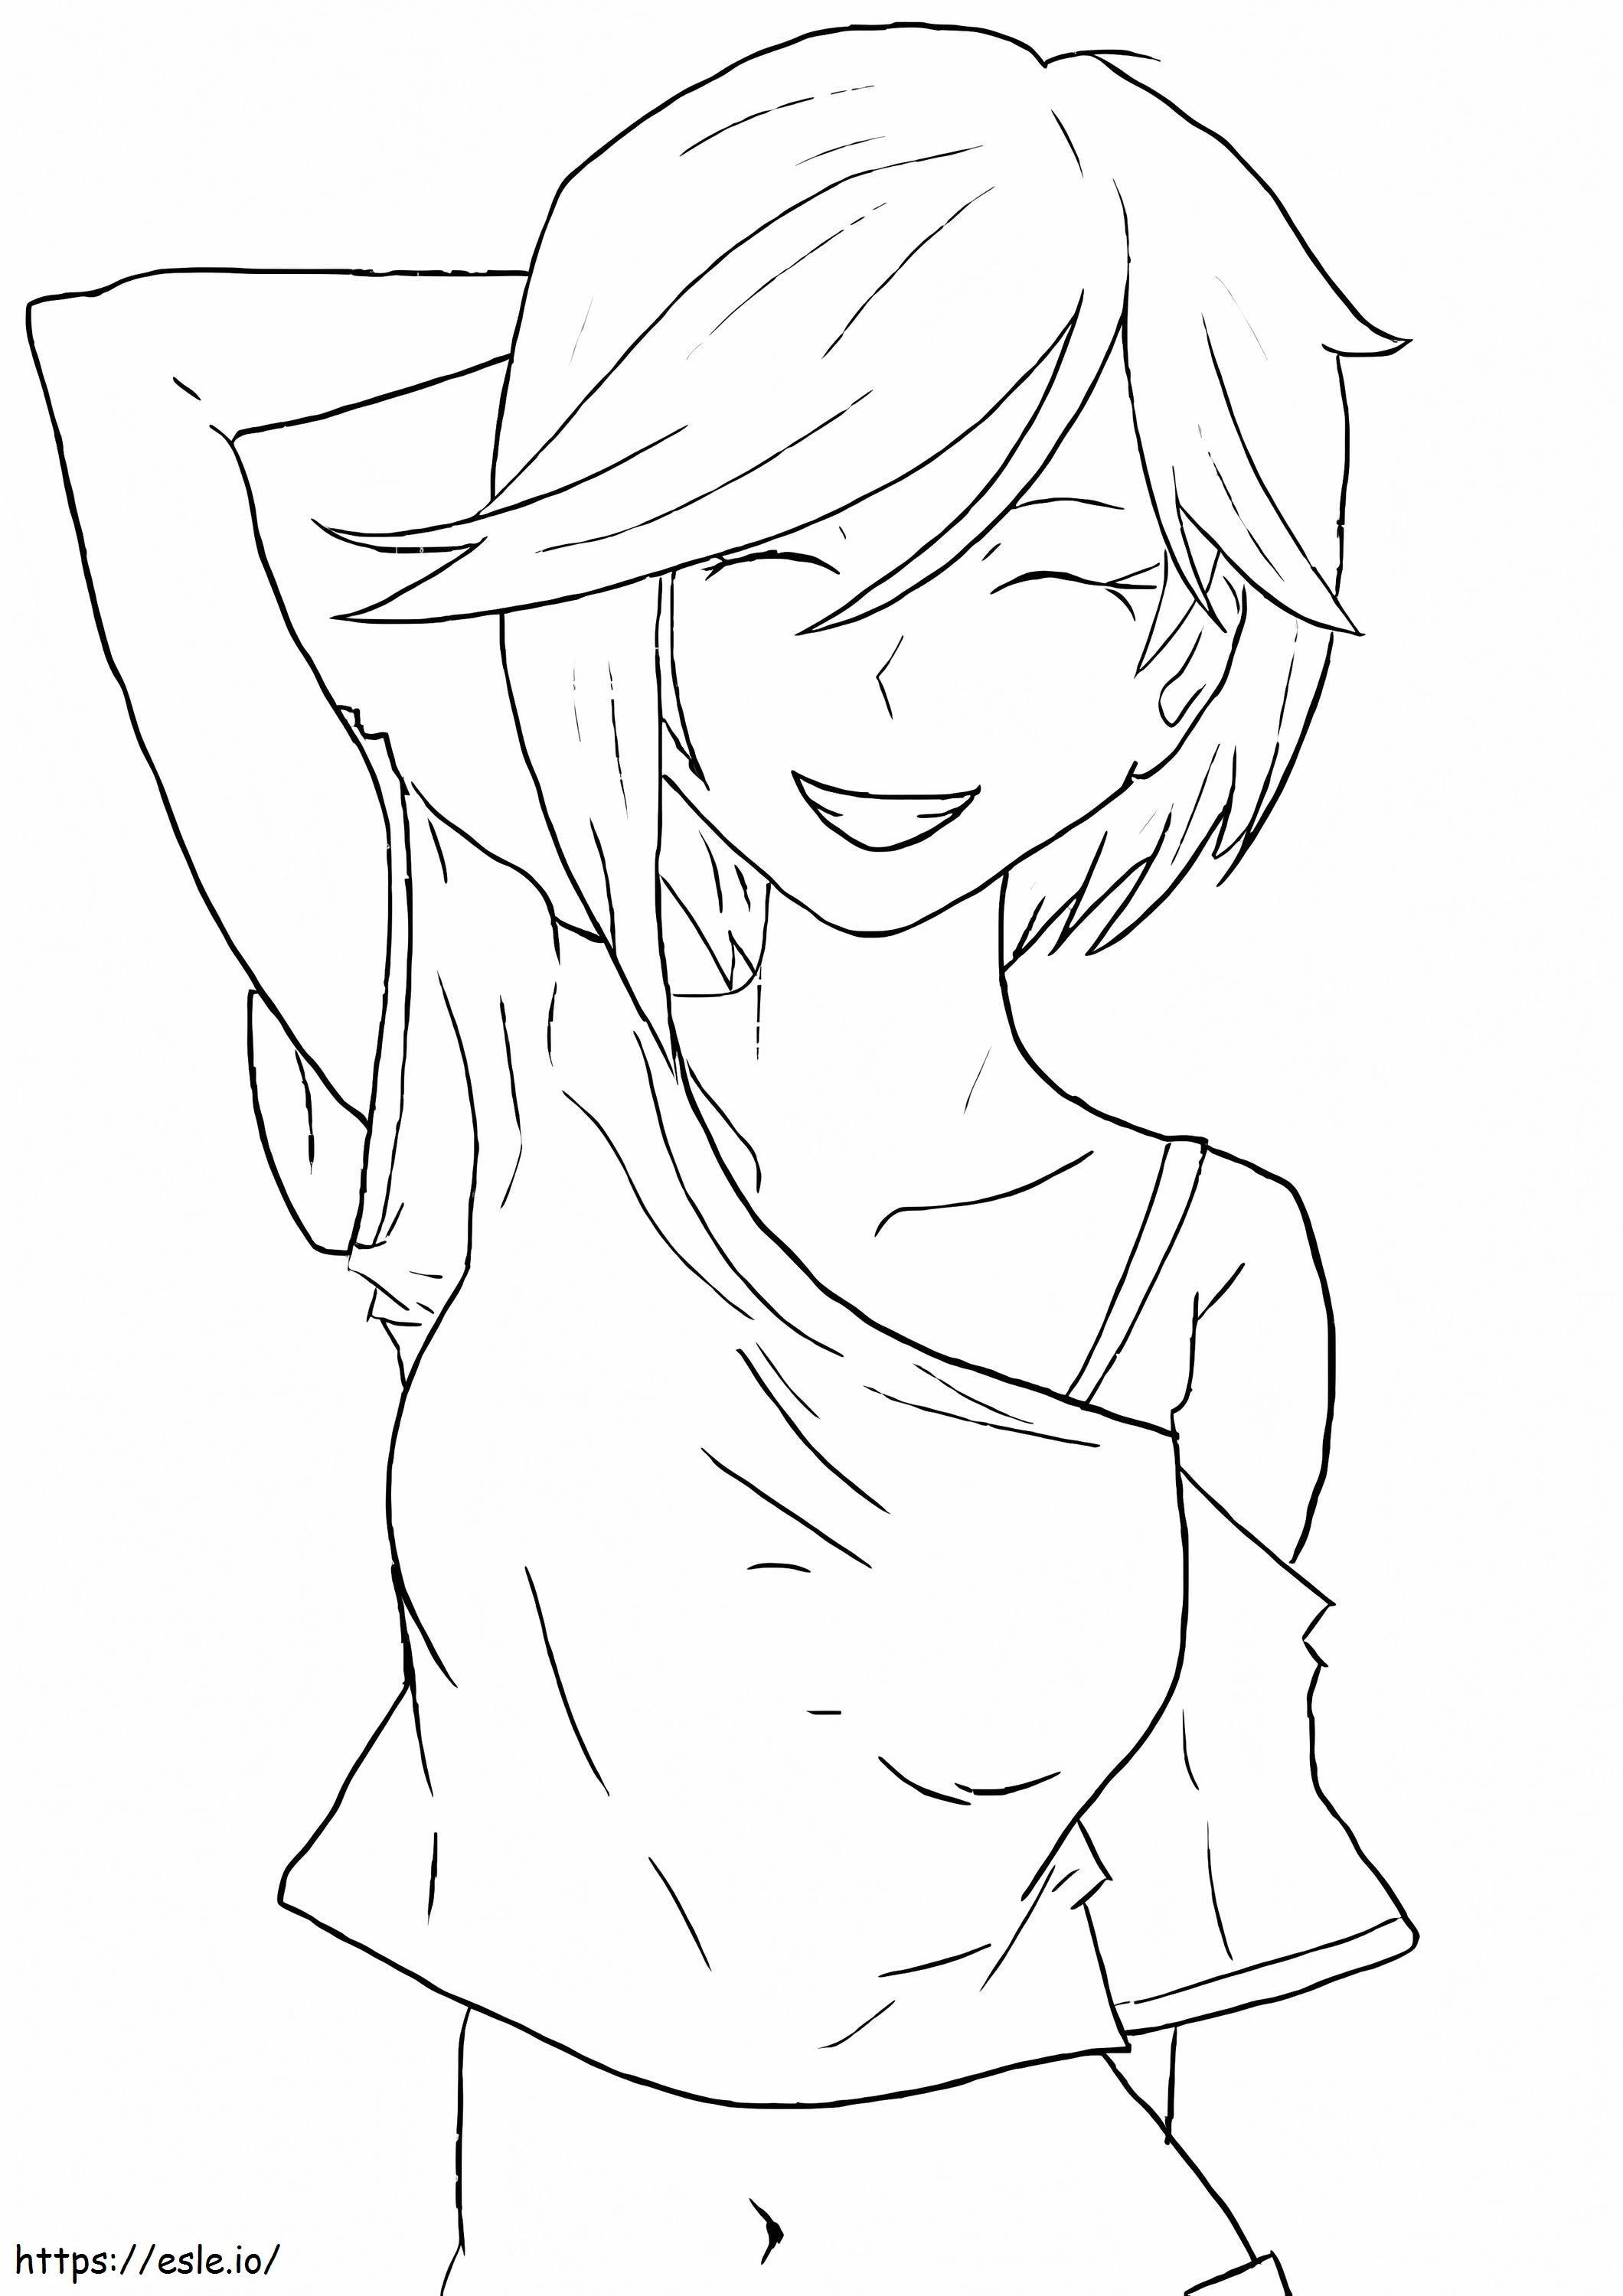 Smiling Anime Girl coloring page